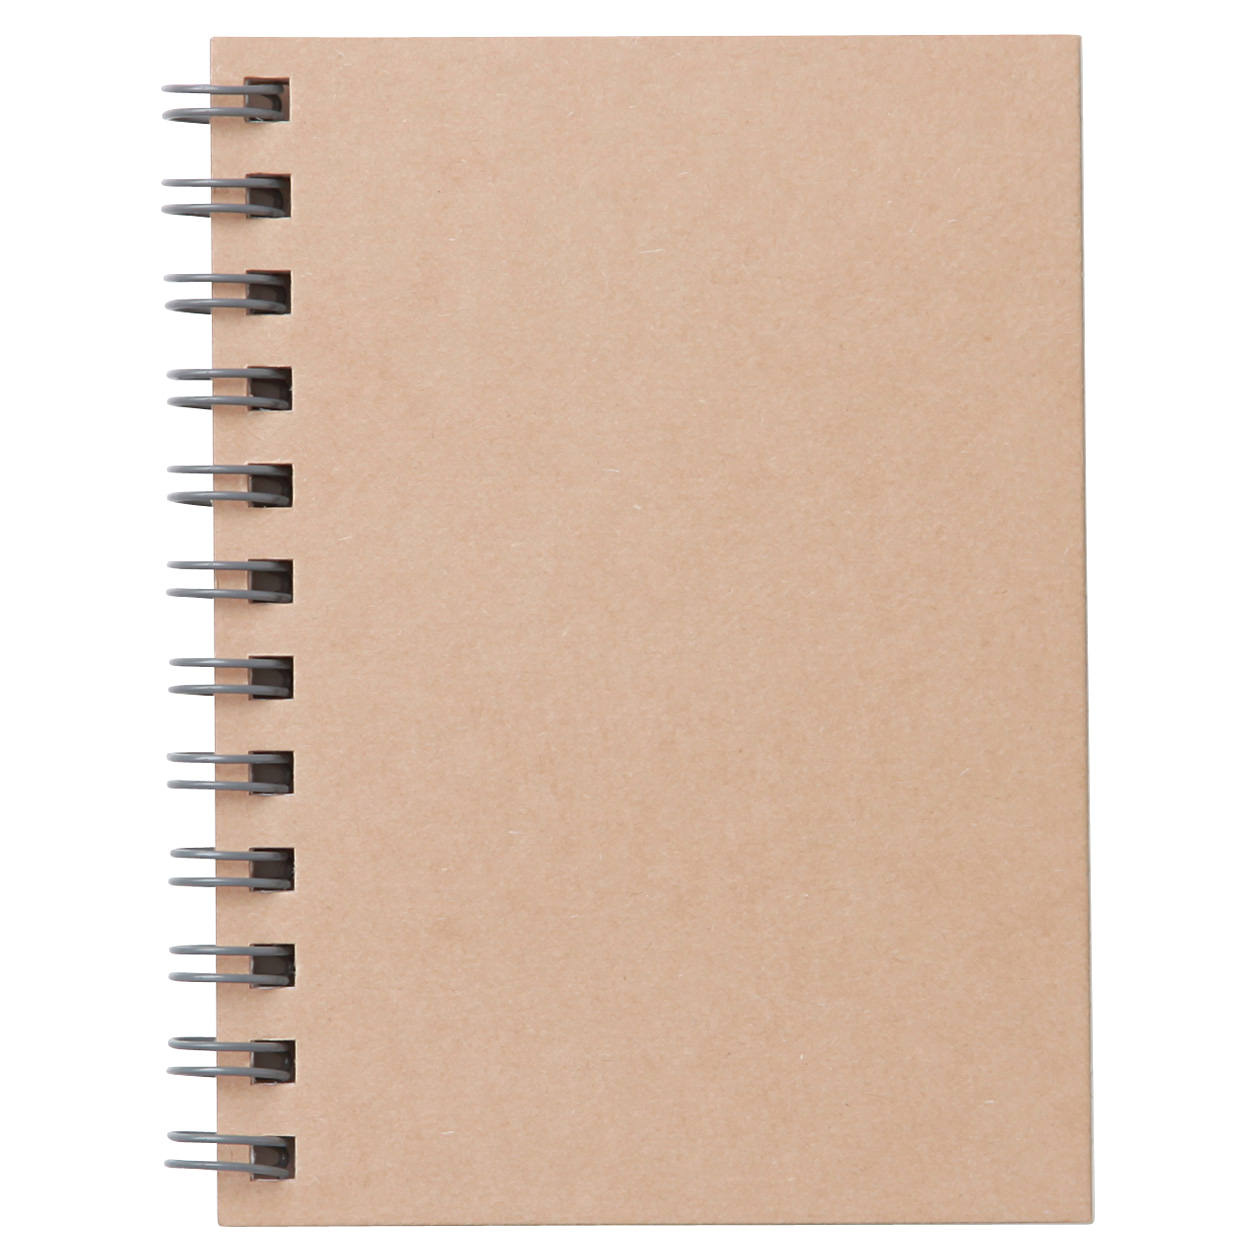 Planting Tree Paper Double Ring Notebook A7